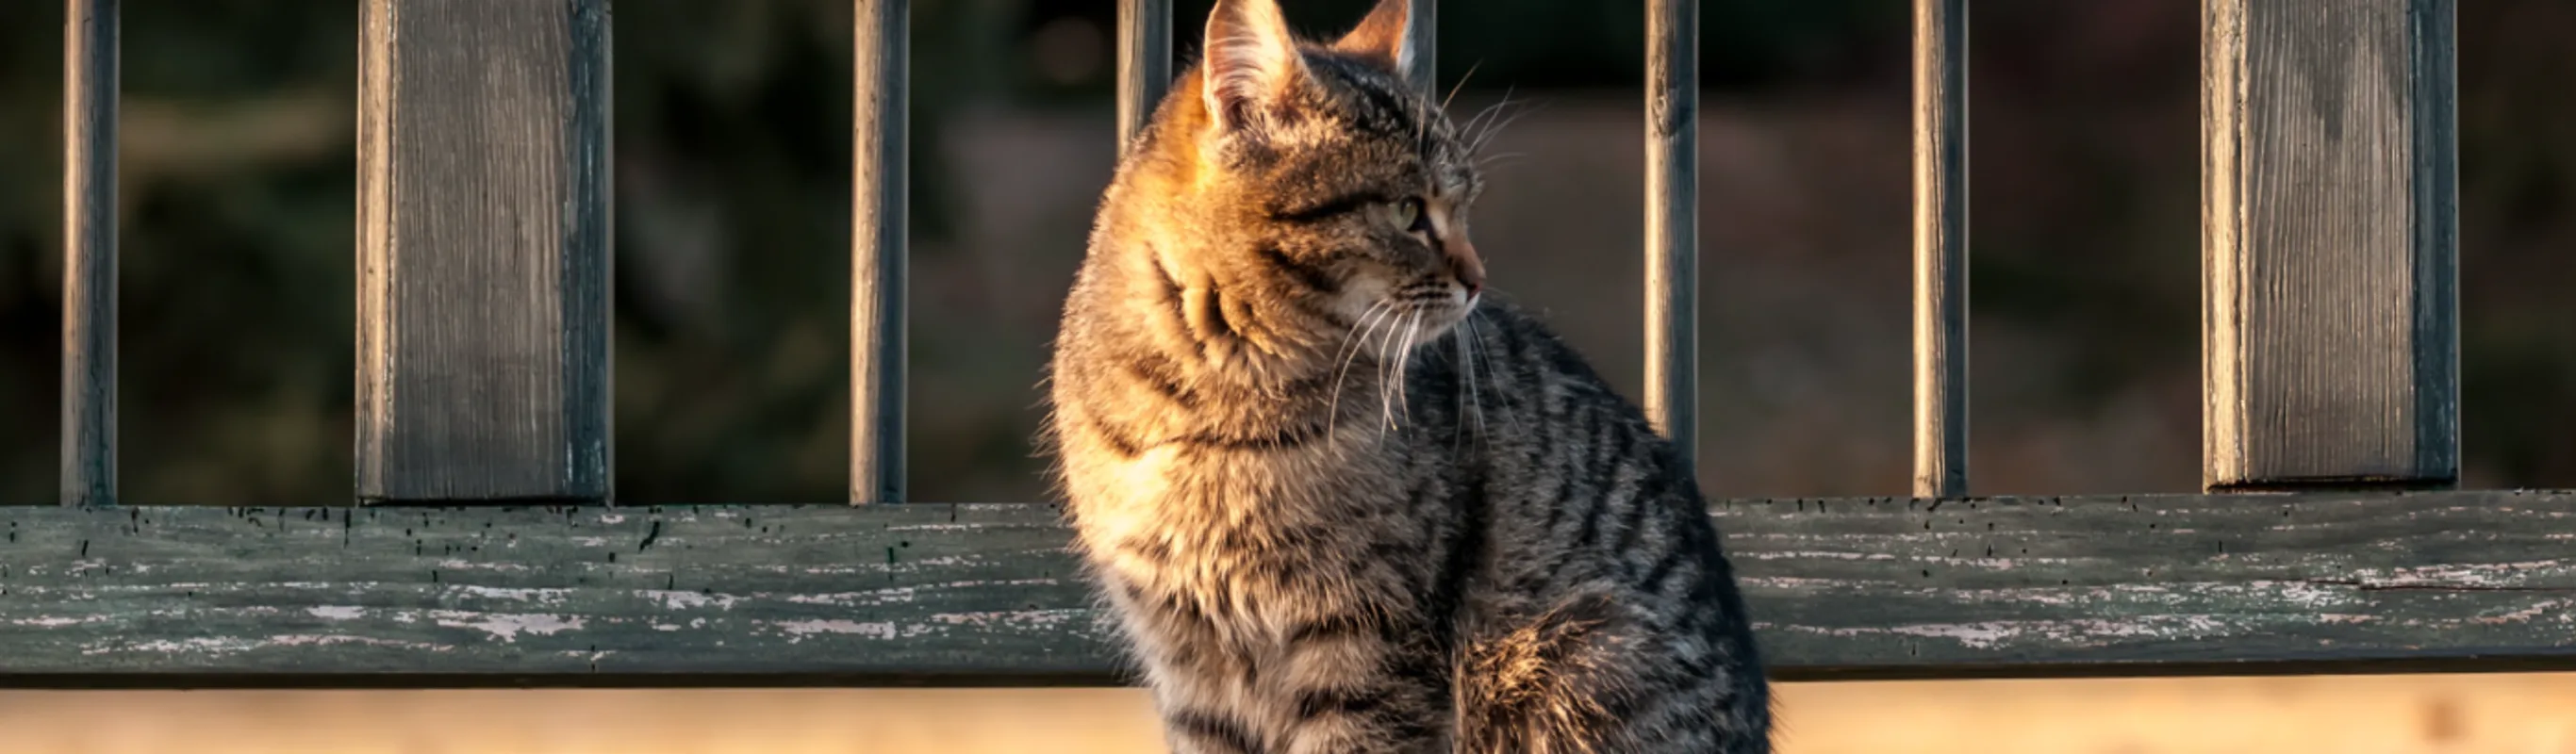 Grey tabby cat is sitting outside by a fence.